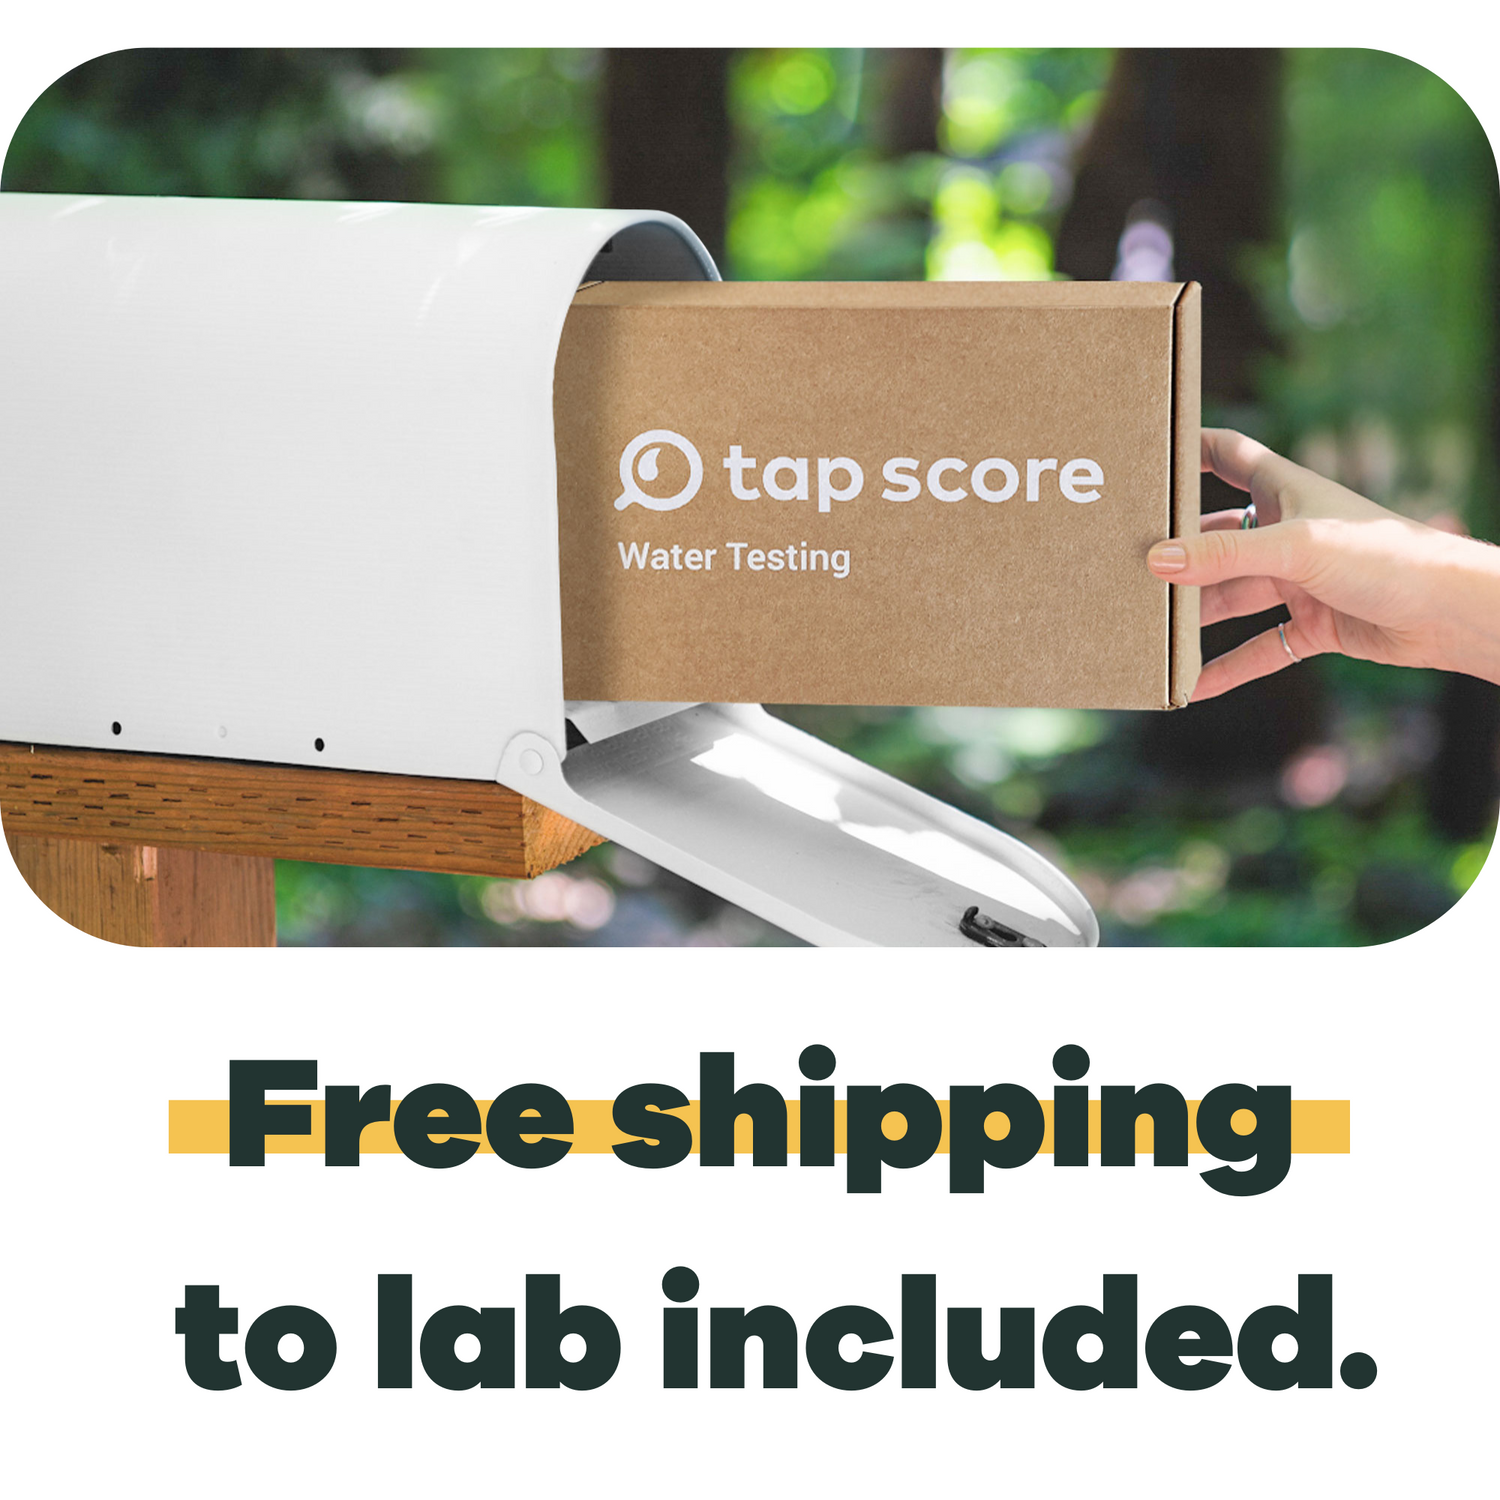 Free shipping both ways with Tap Score